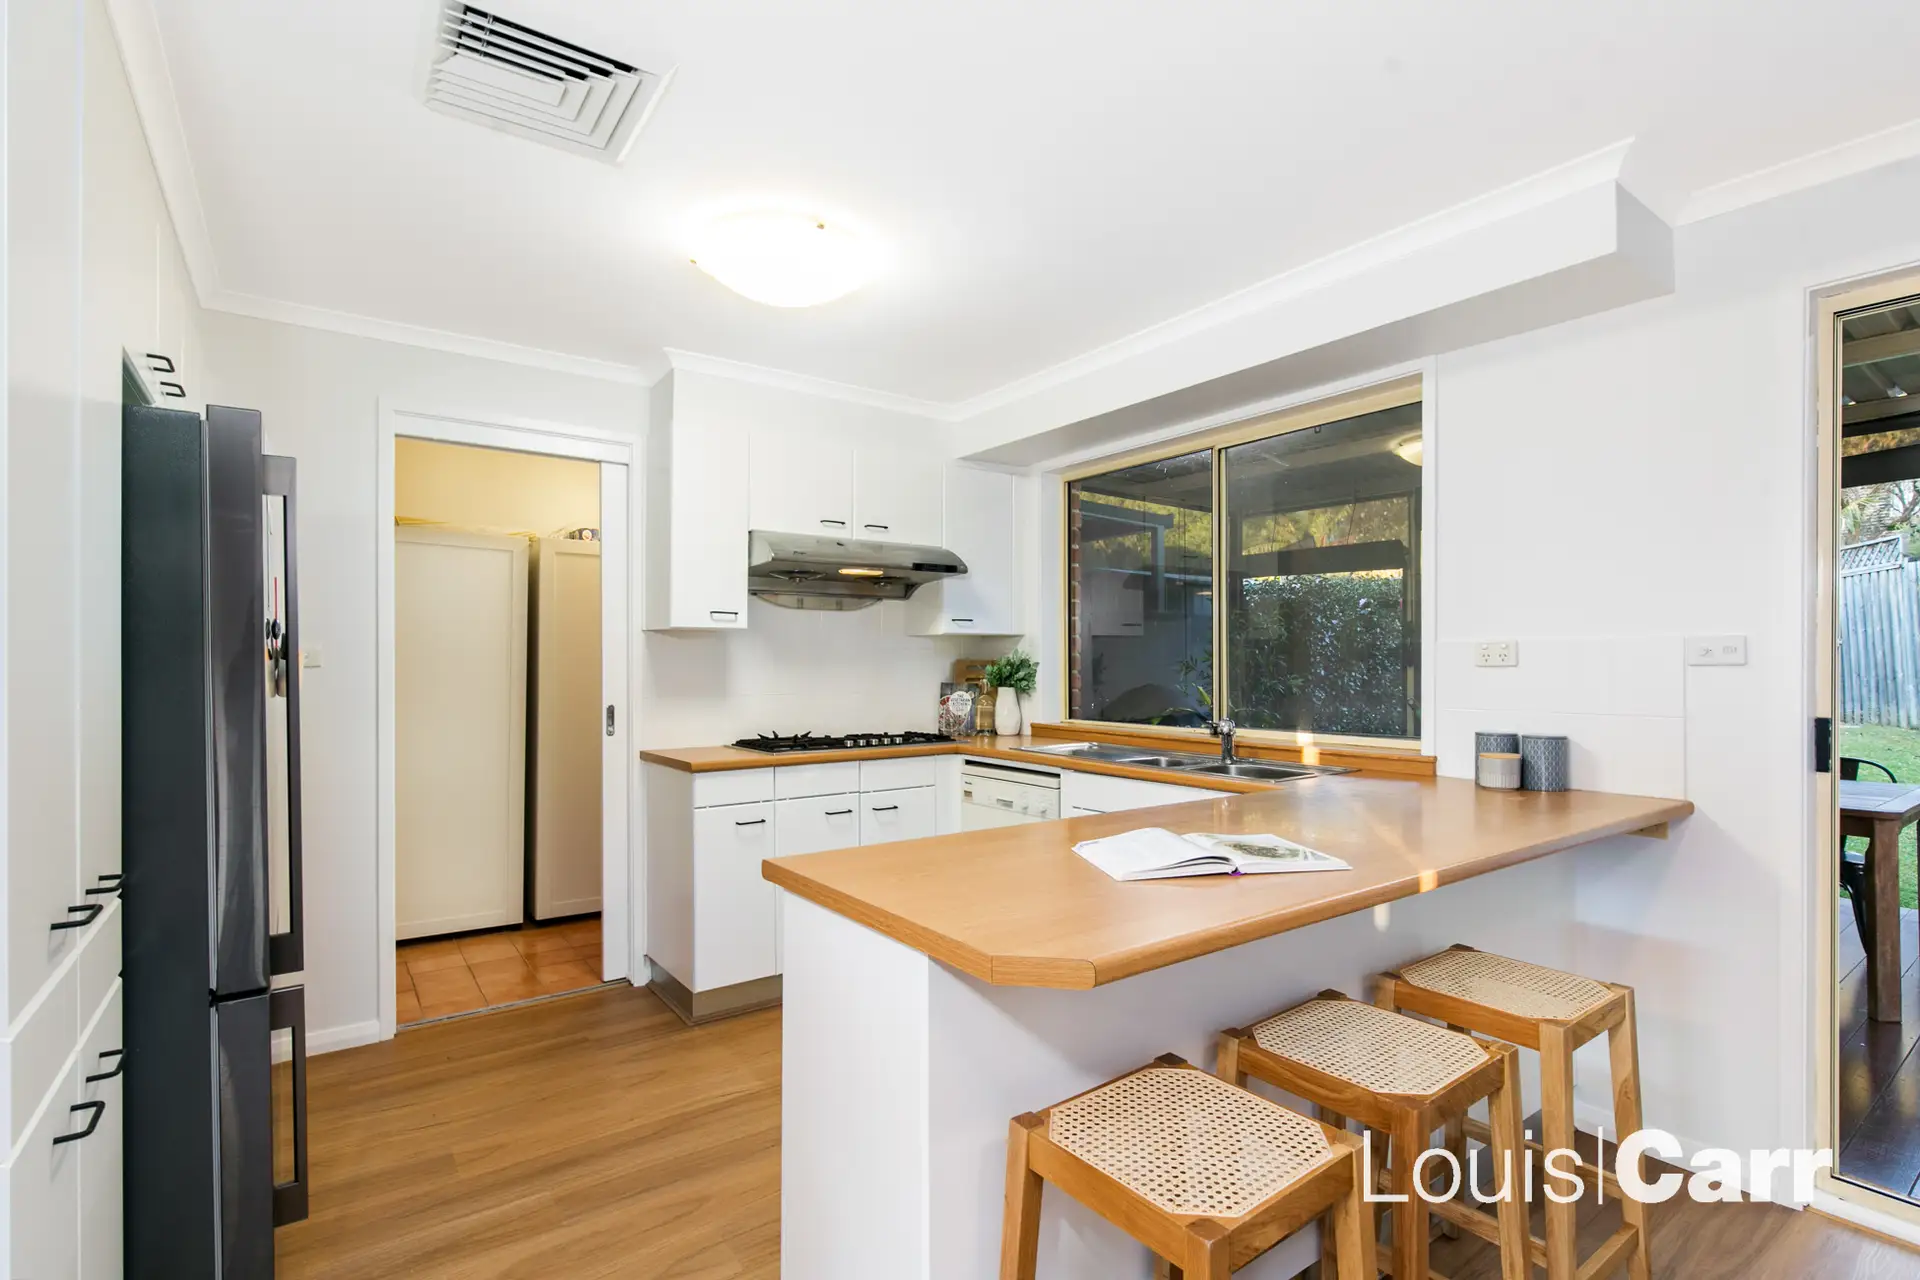 Photo #3: 11a Darlington Drive, Cherrybrook - Sold by Louis Carr Real Estate